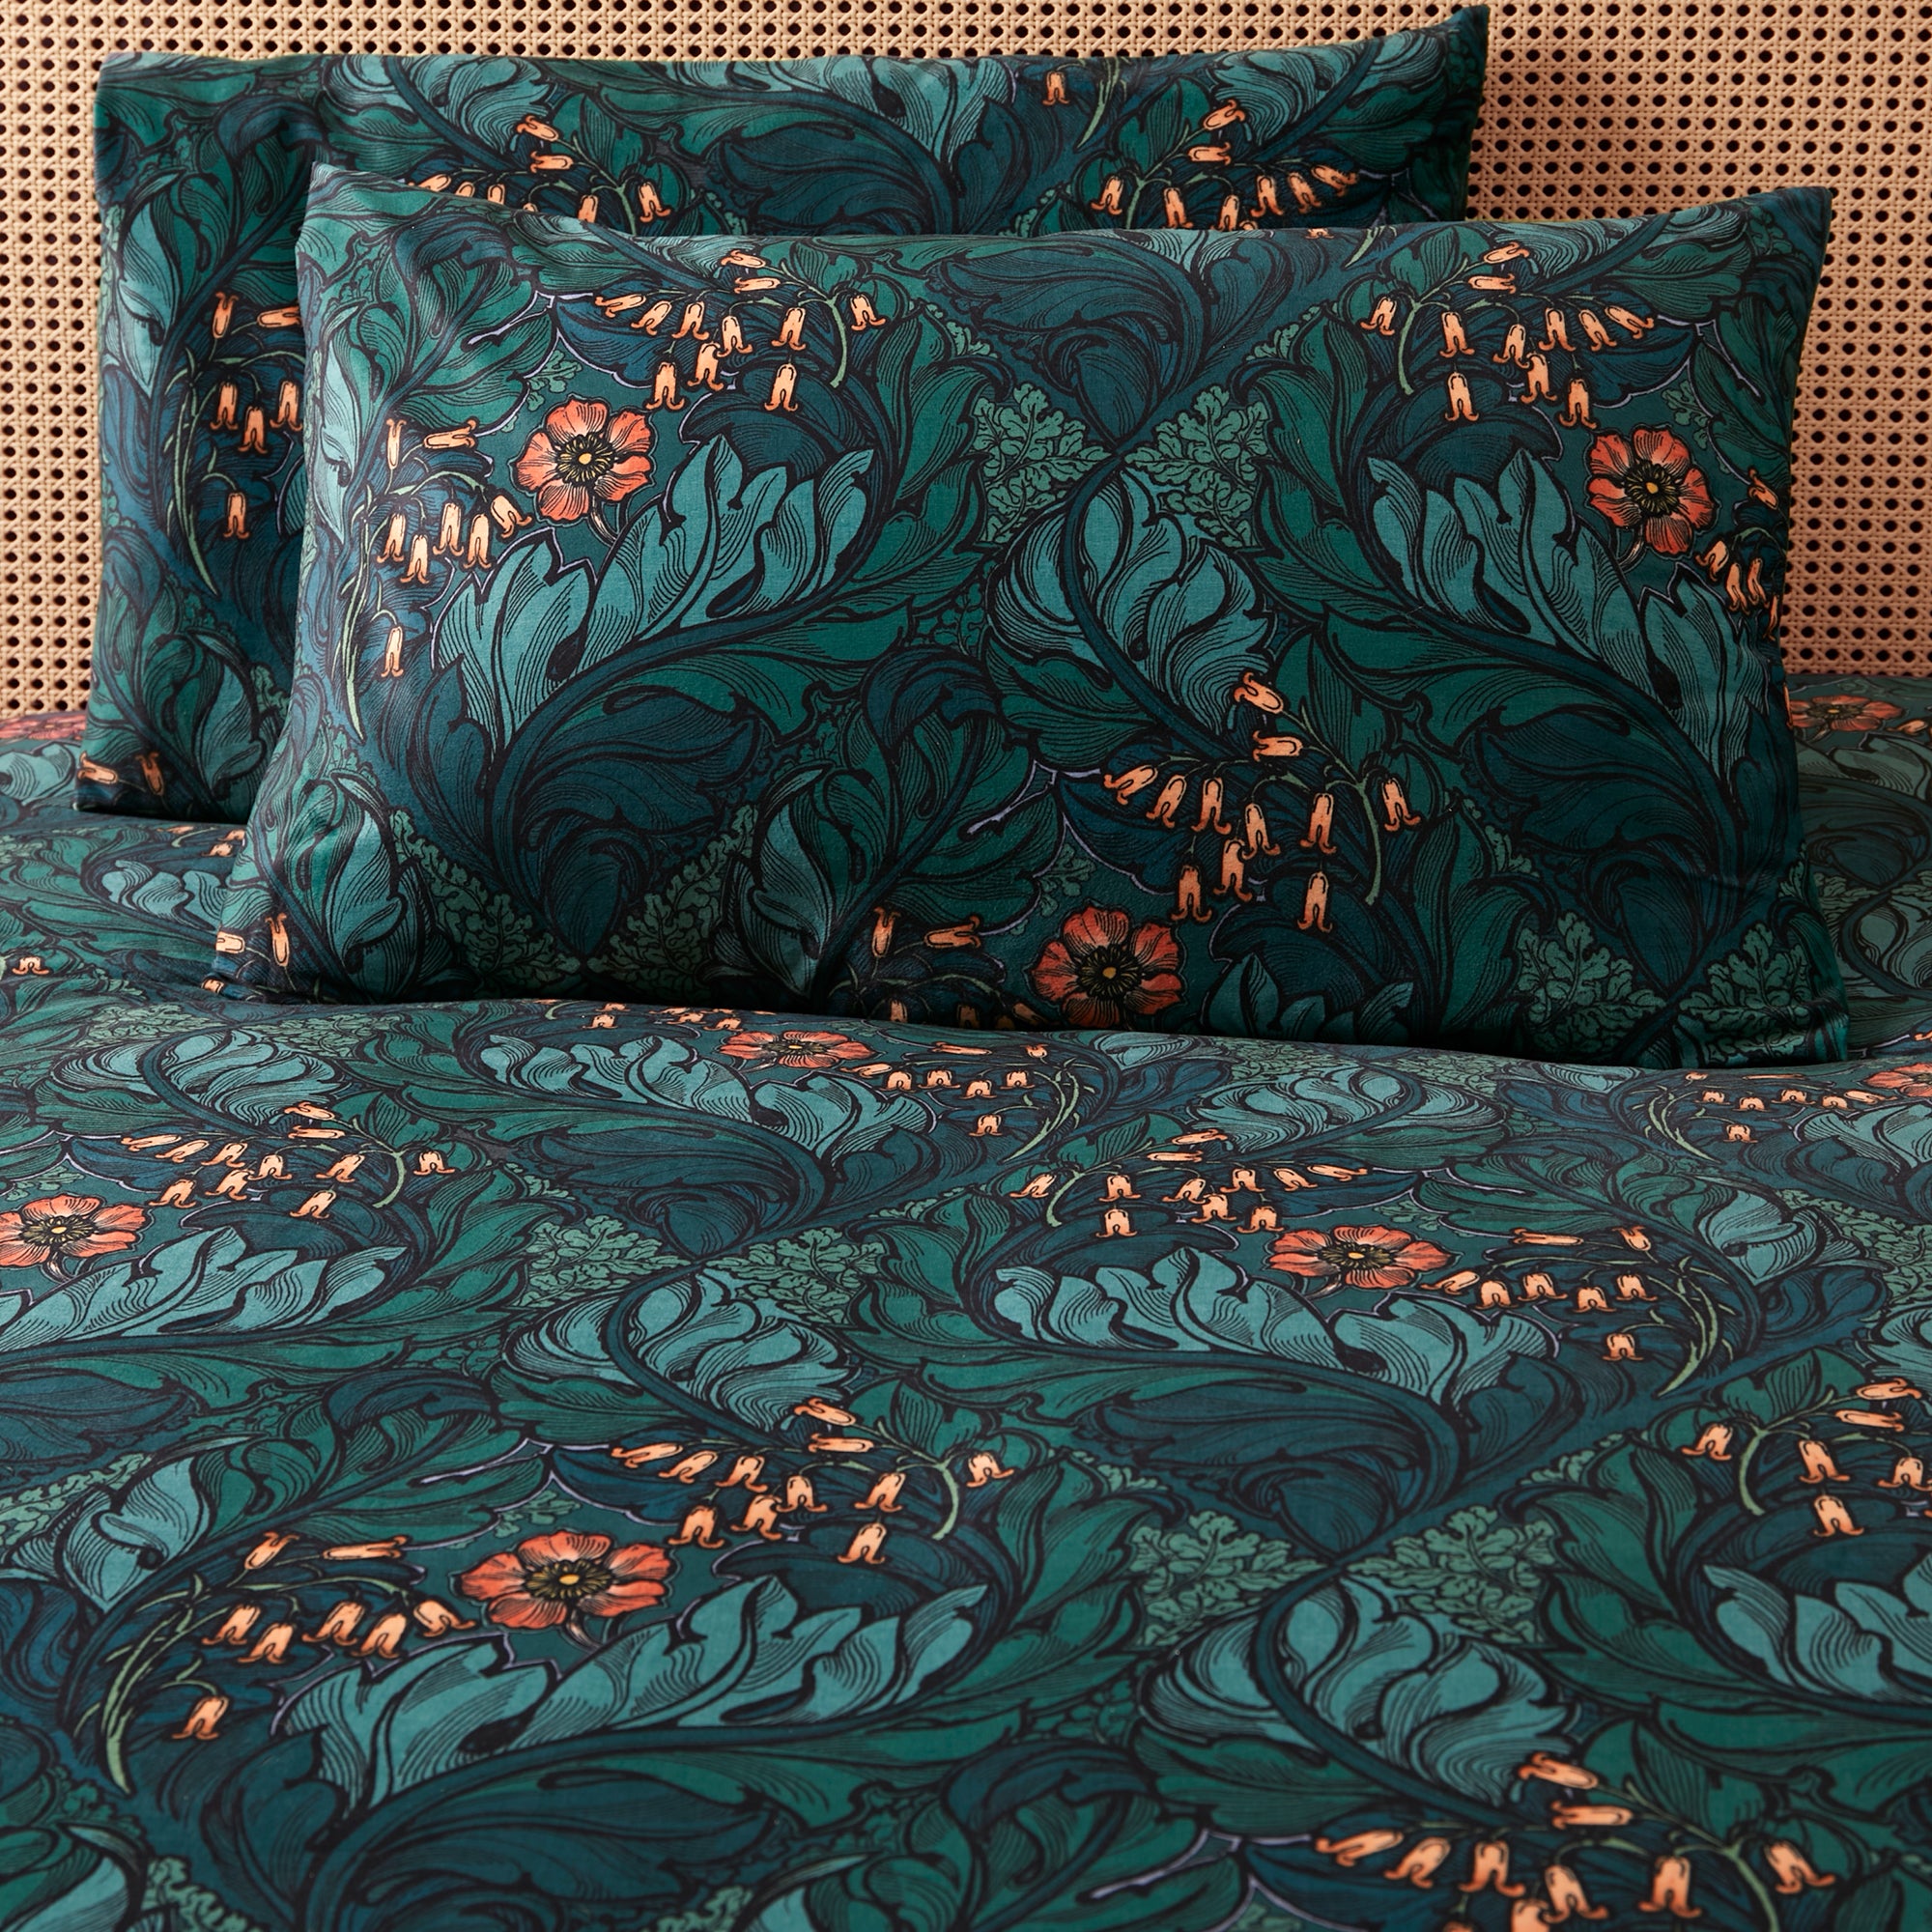 Duvet Cover Set Rambleicious by Laurence Llewelyn-Bowen in Bottle Green